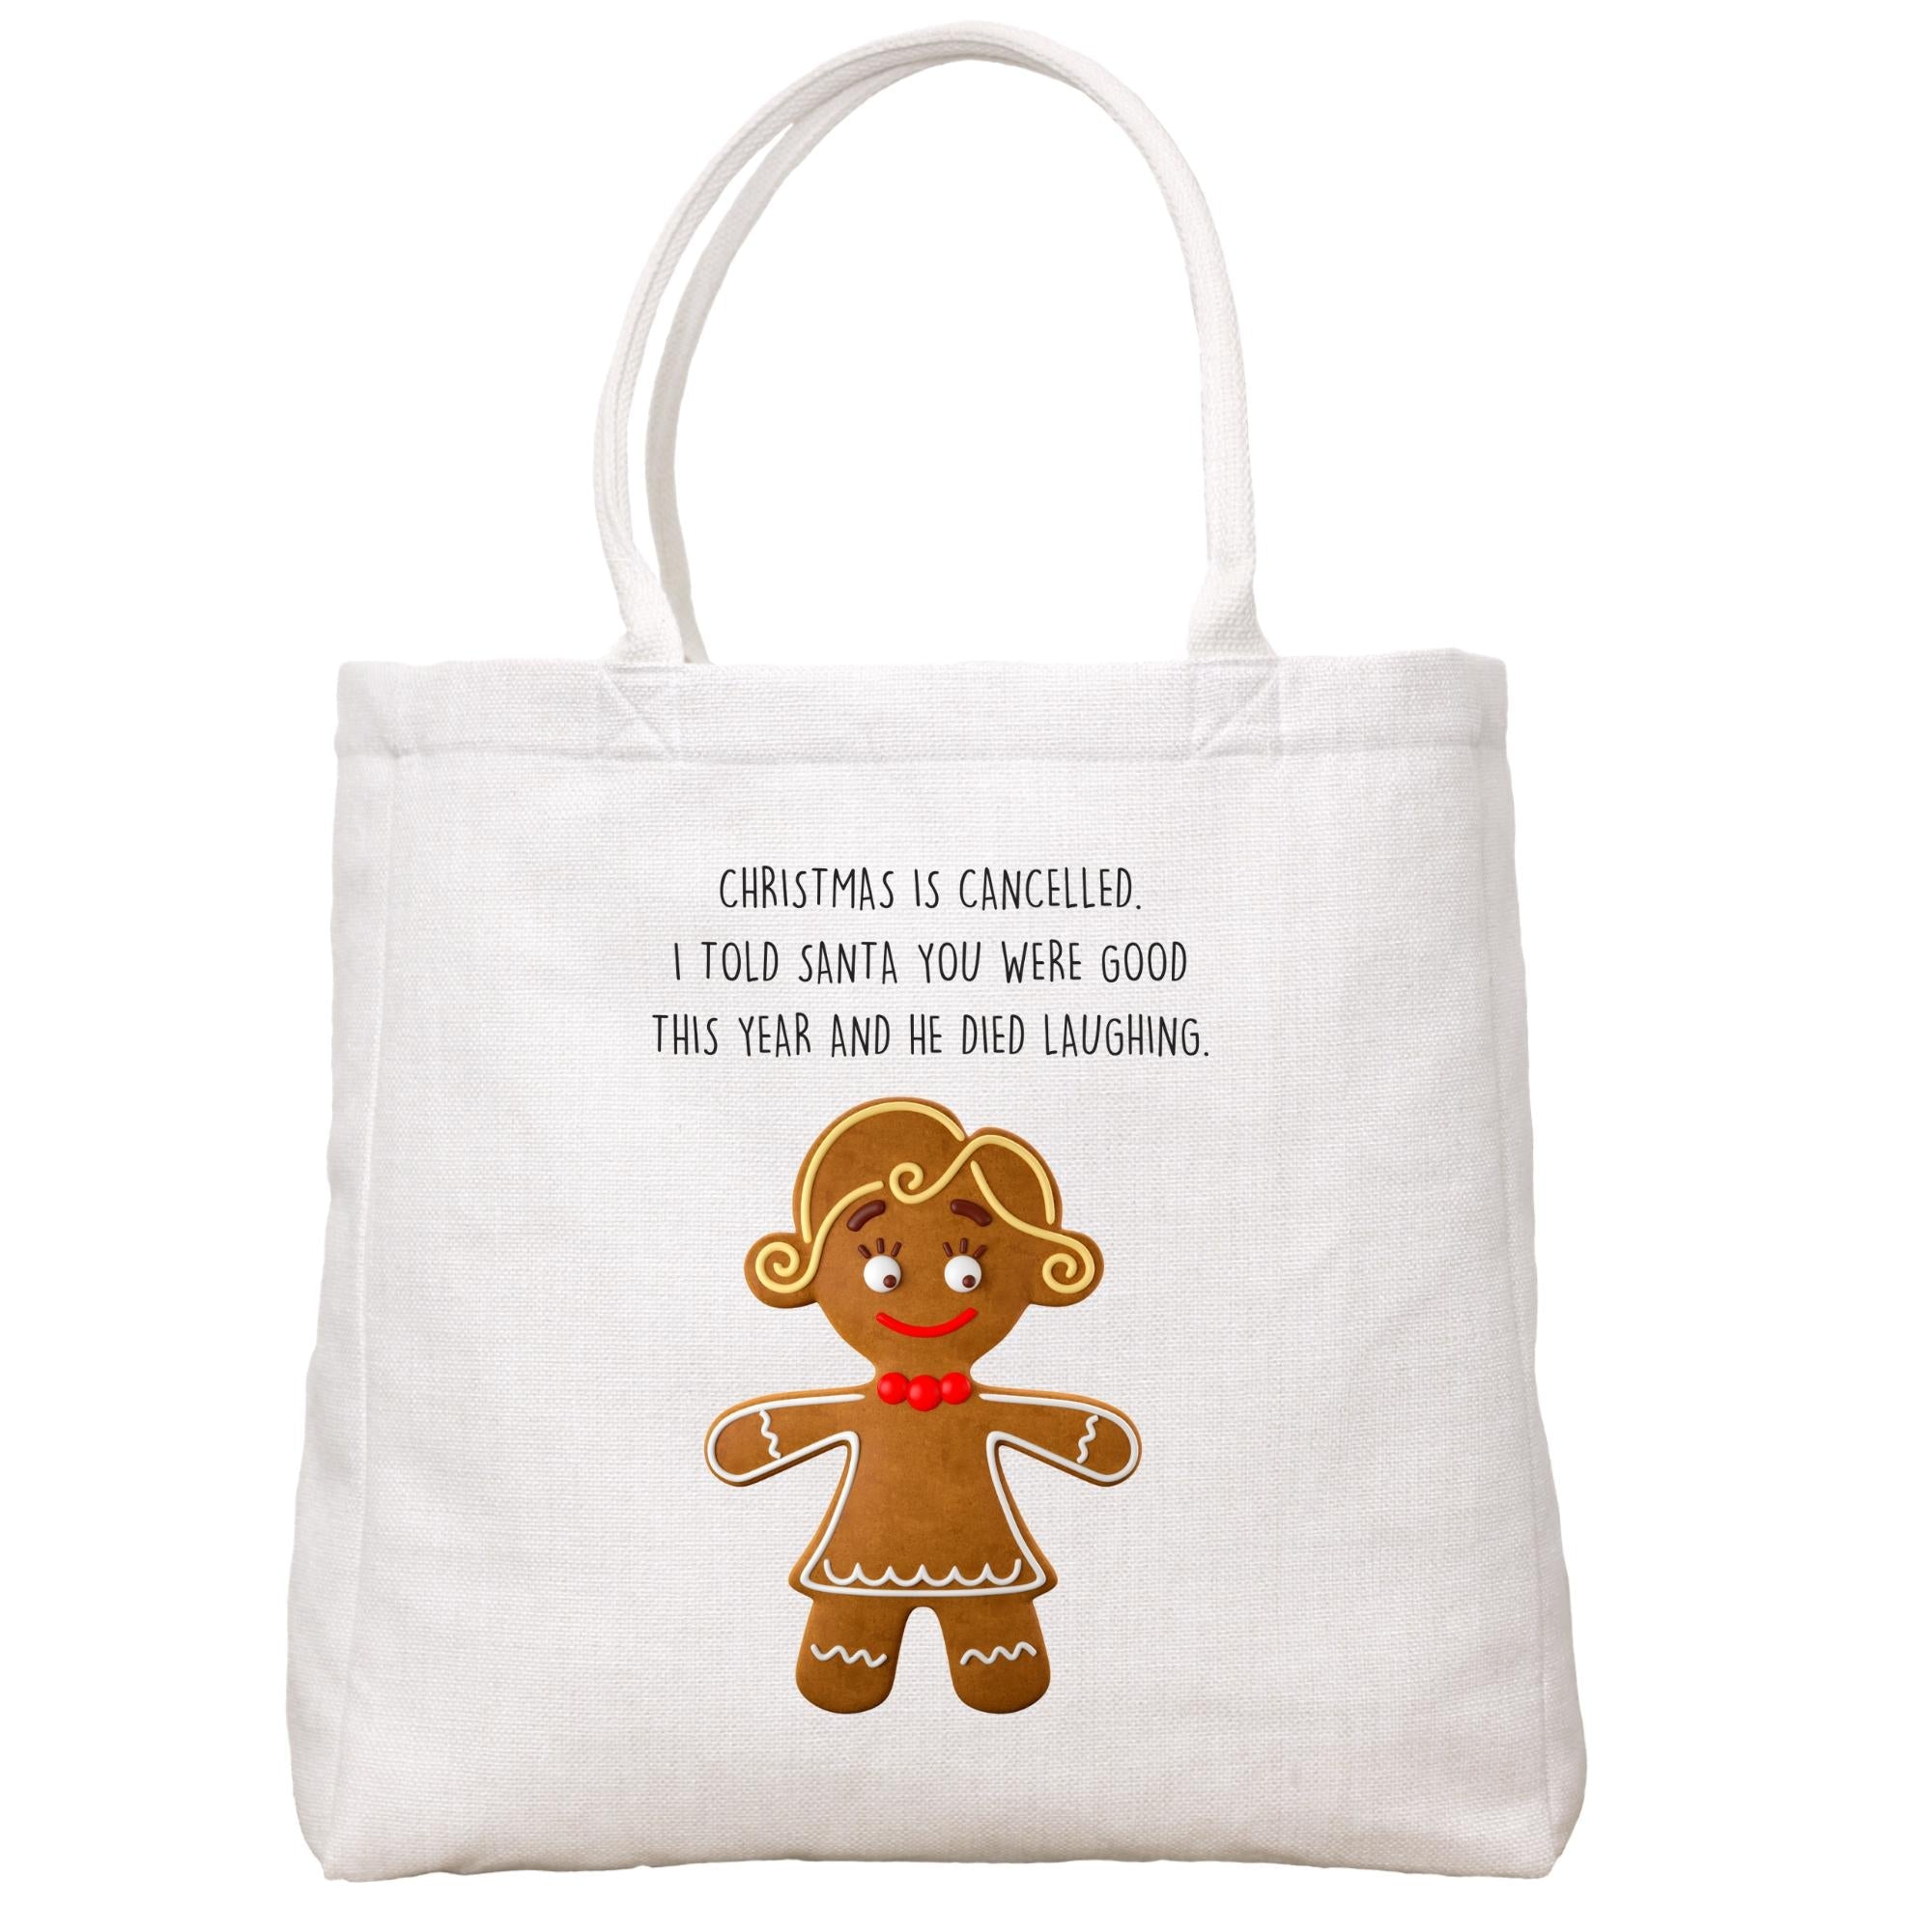 Christmas is Cancelled Tote Bag Tote Bag - Southern Sisters